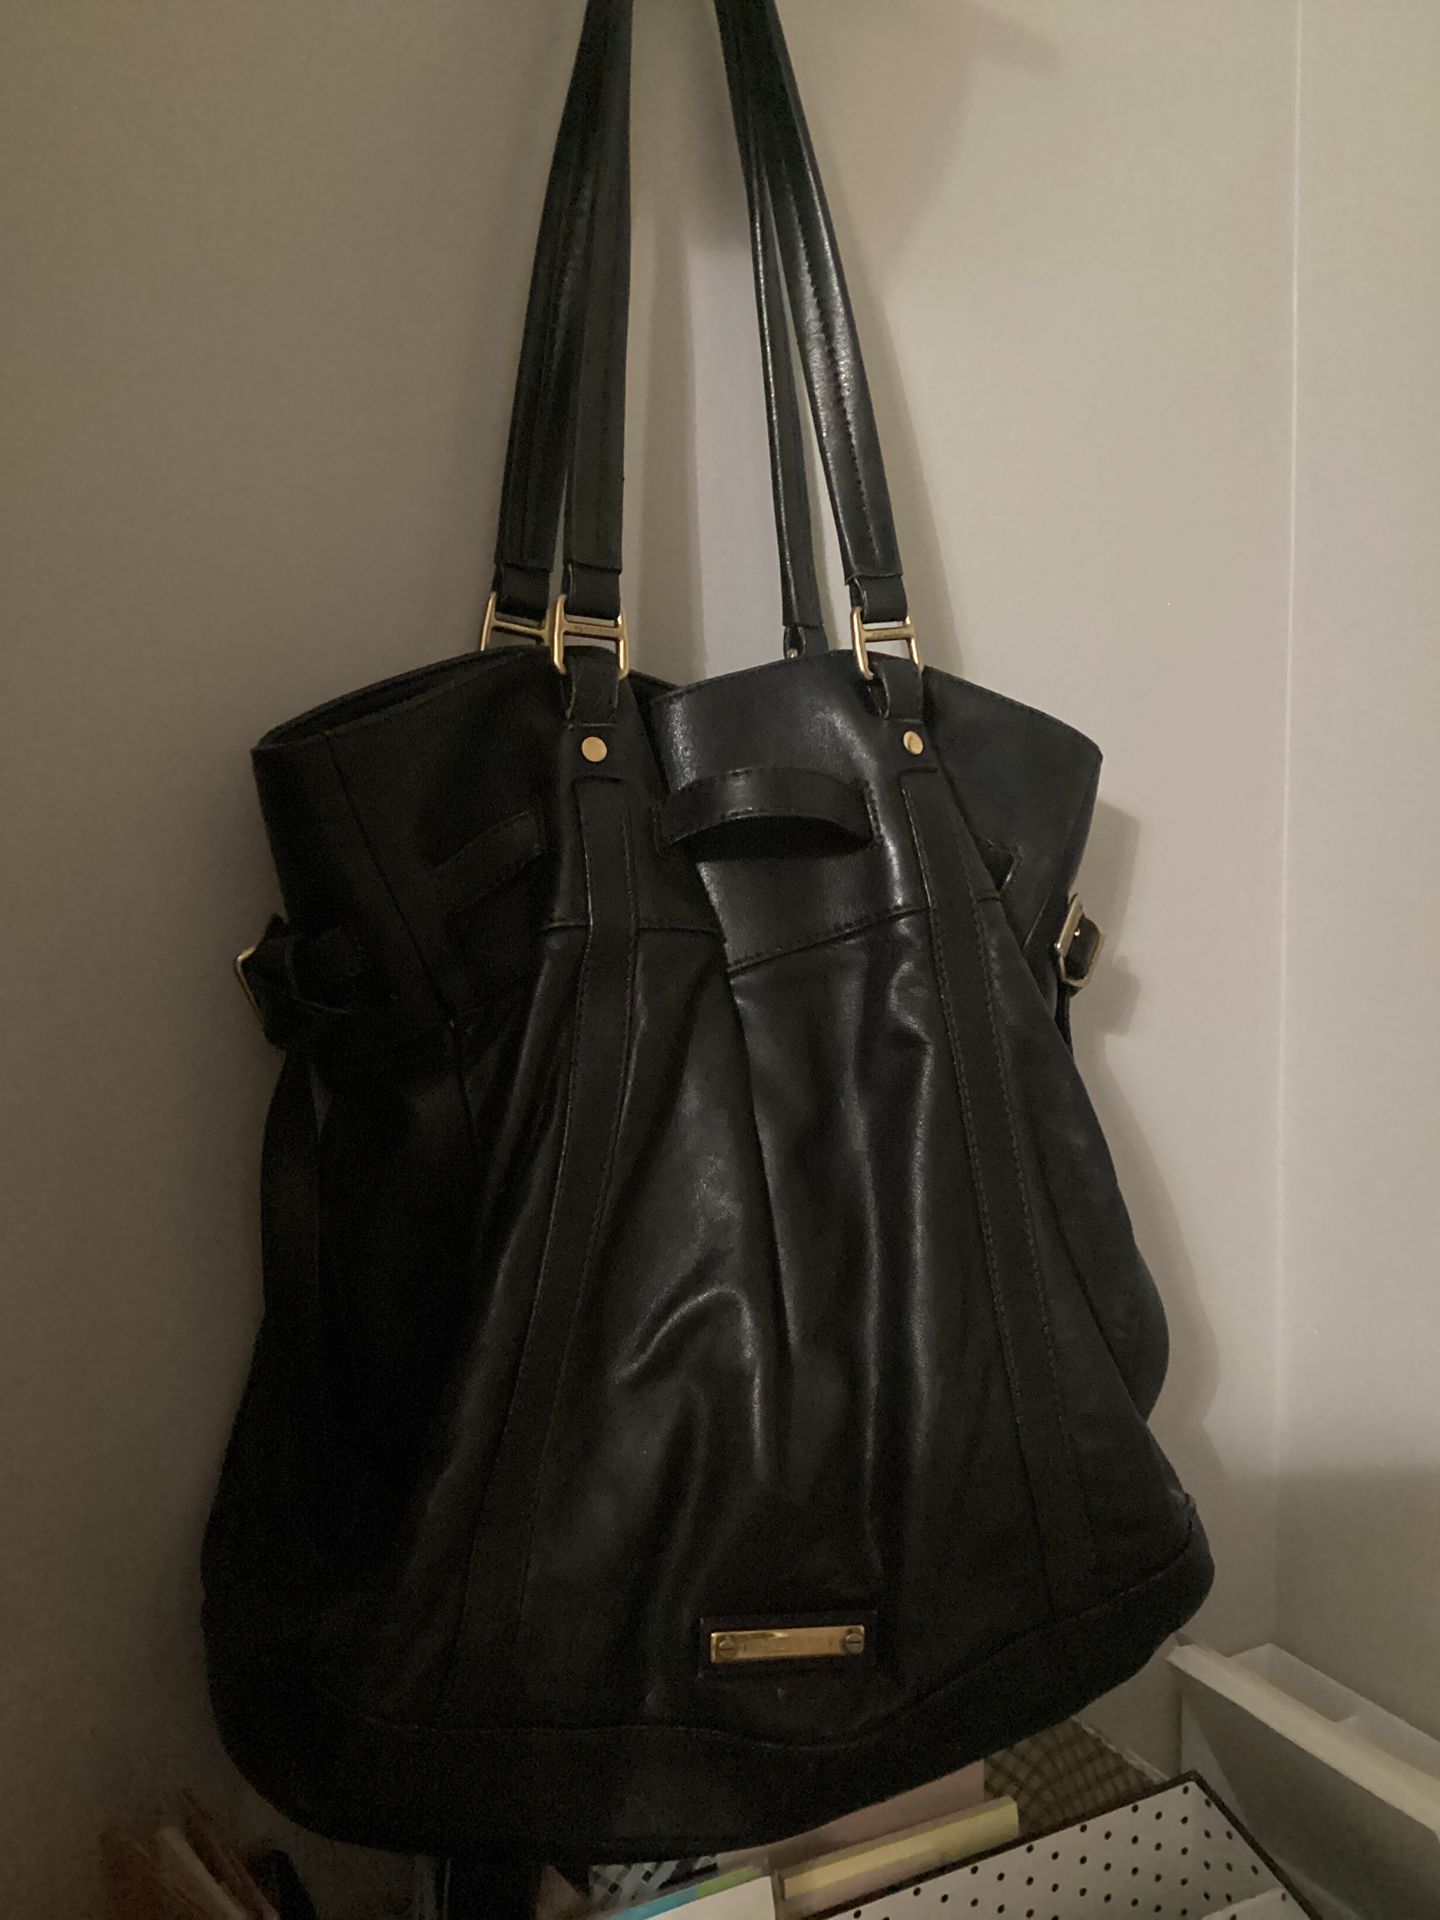 Authentic black Leather BURBERRY BAG